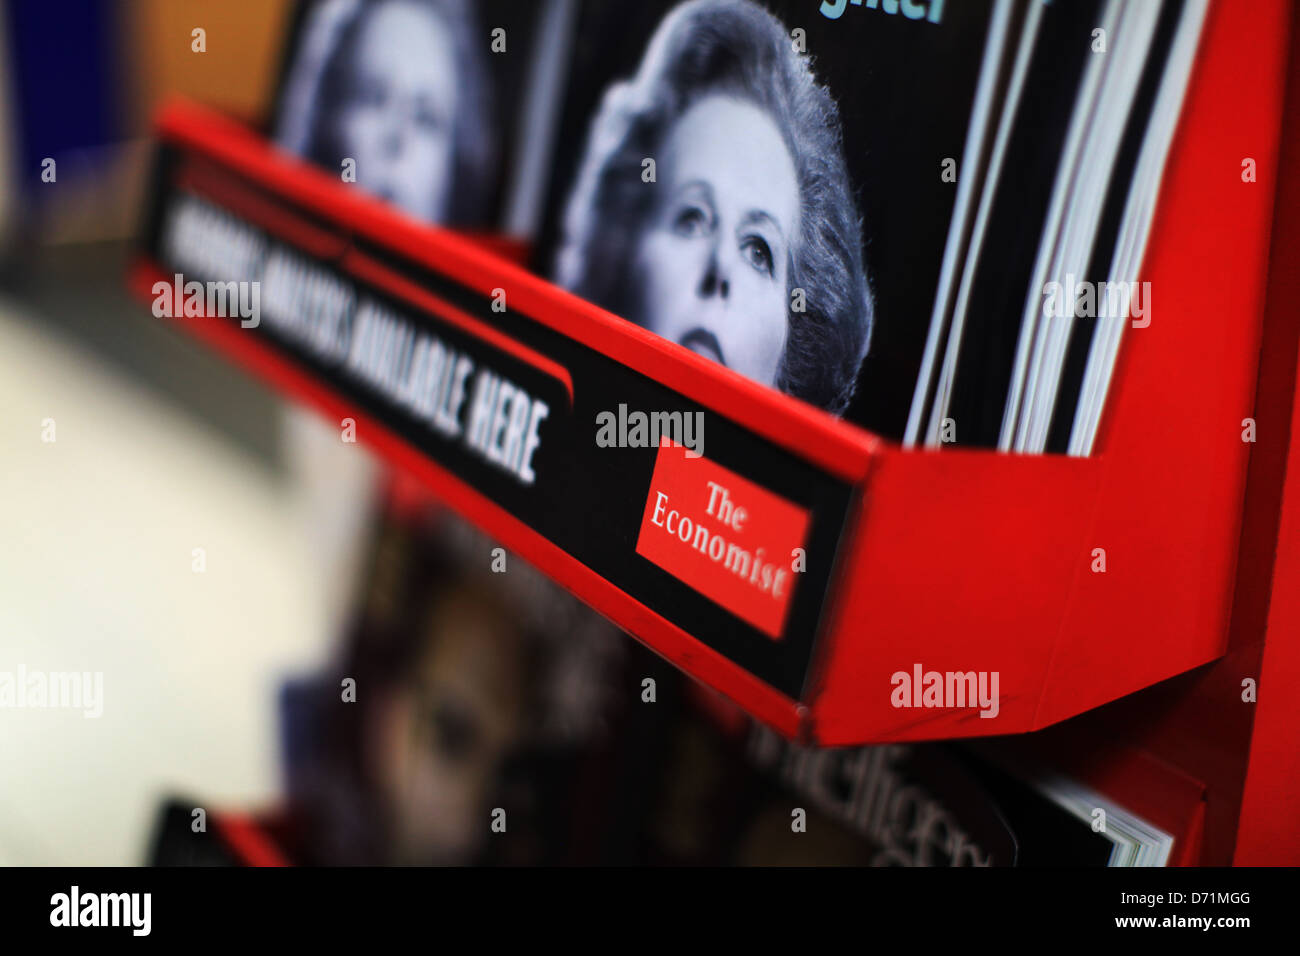 View of International Airport magazine rack featuring The Economist and picture of Margaret Thatcher Stock Photo